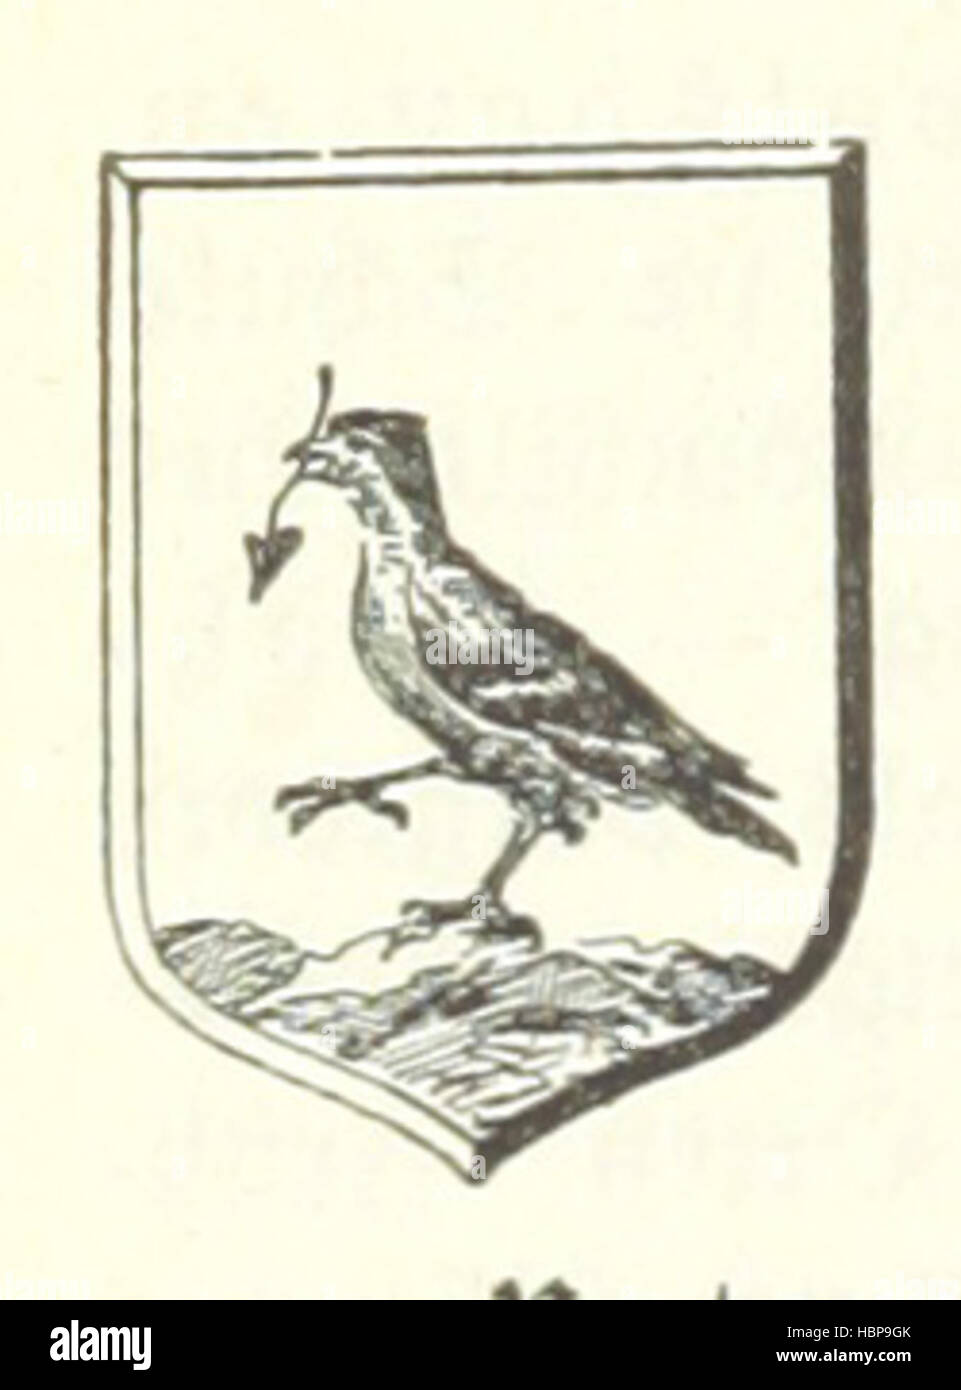 Image taken from page 666 of 'Geographisch-historisches Handbuch von Bayern' Image taken from page 666 of 'Geographisch-historisches Handbuch von Bayern' Stock Photo